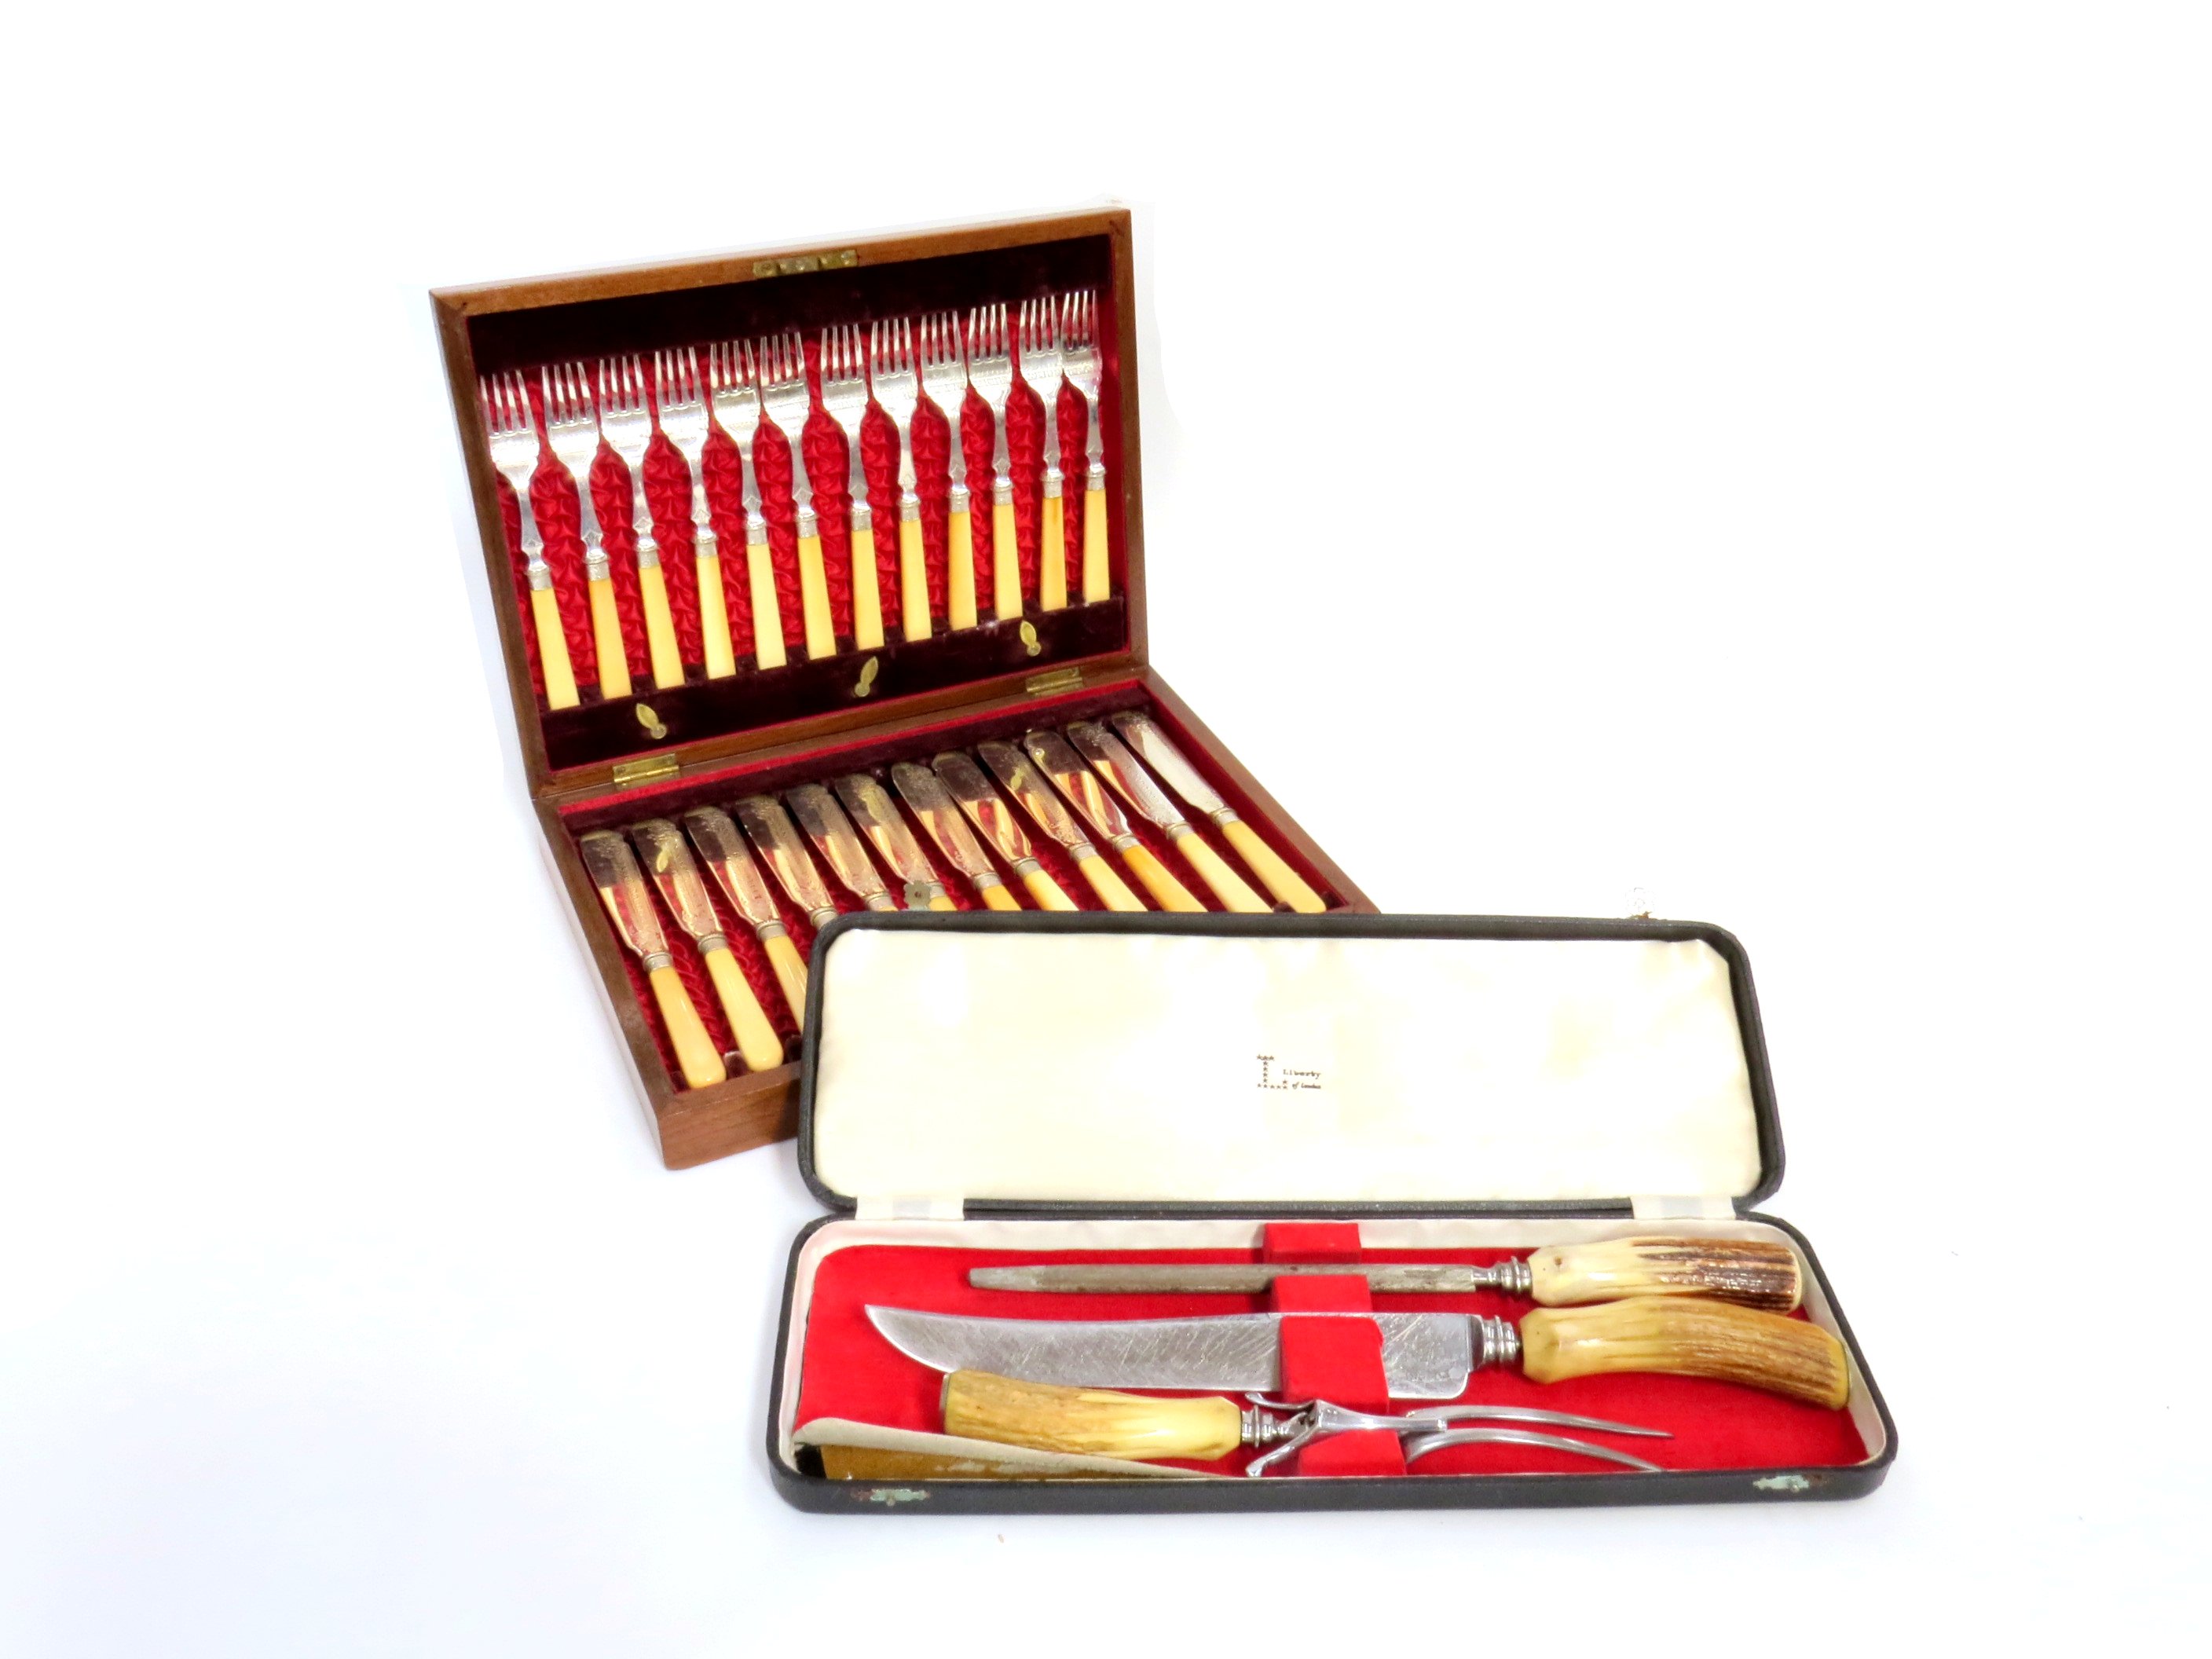 A cased Liberty of London carving set and a cased set of fish knives and forks